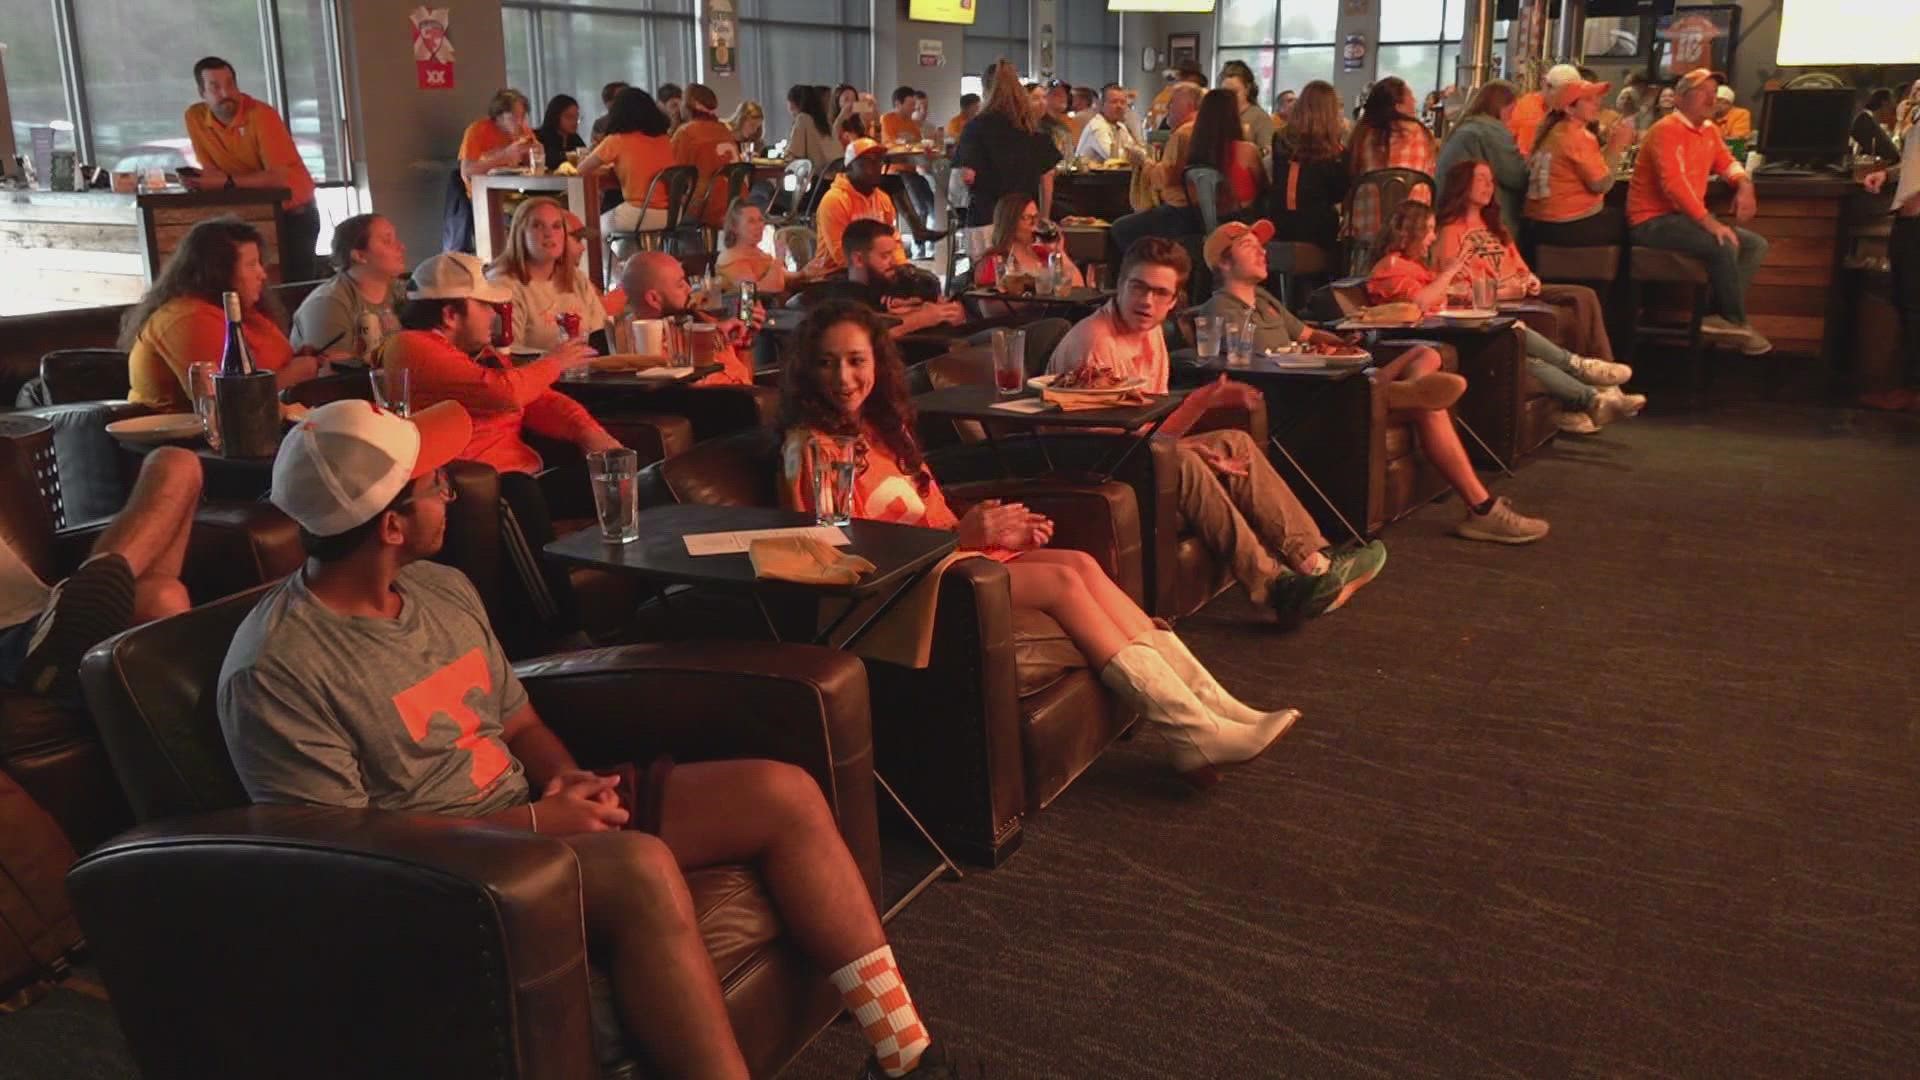 Even though the Vols lost the anticipated match-up, most fans still had their eyes glued to the game until the buzzer.